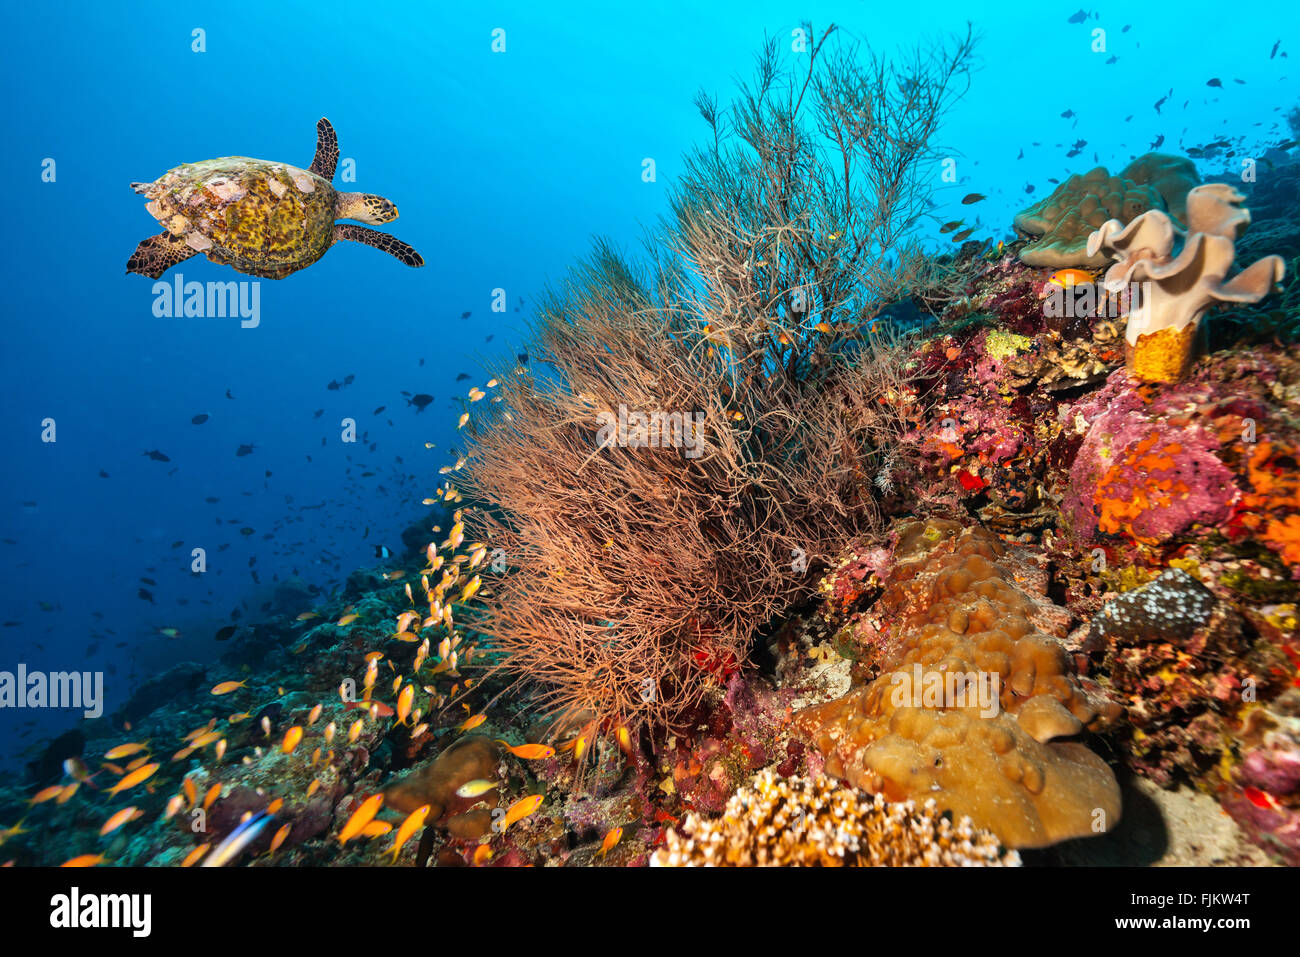 Coral reef with turtle Stock Photo